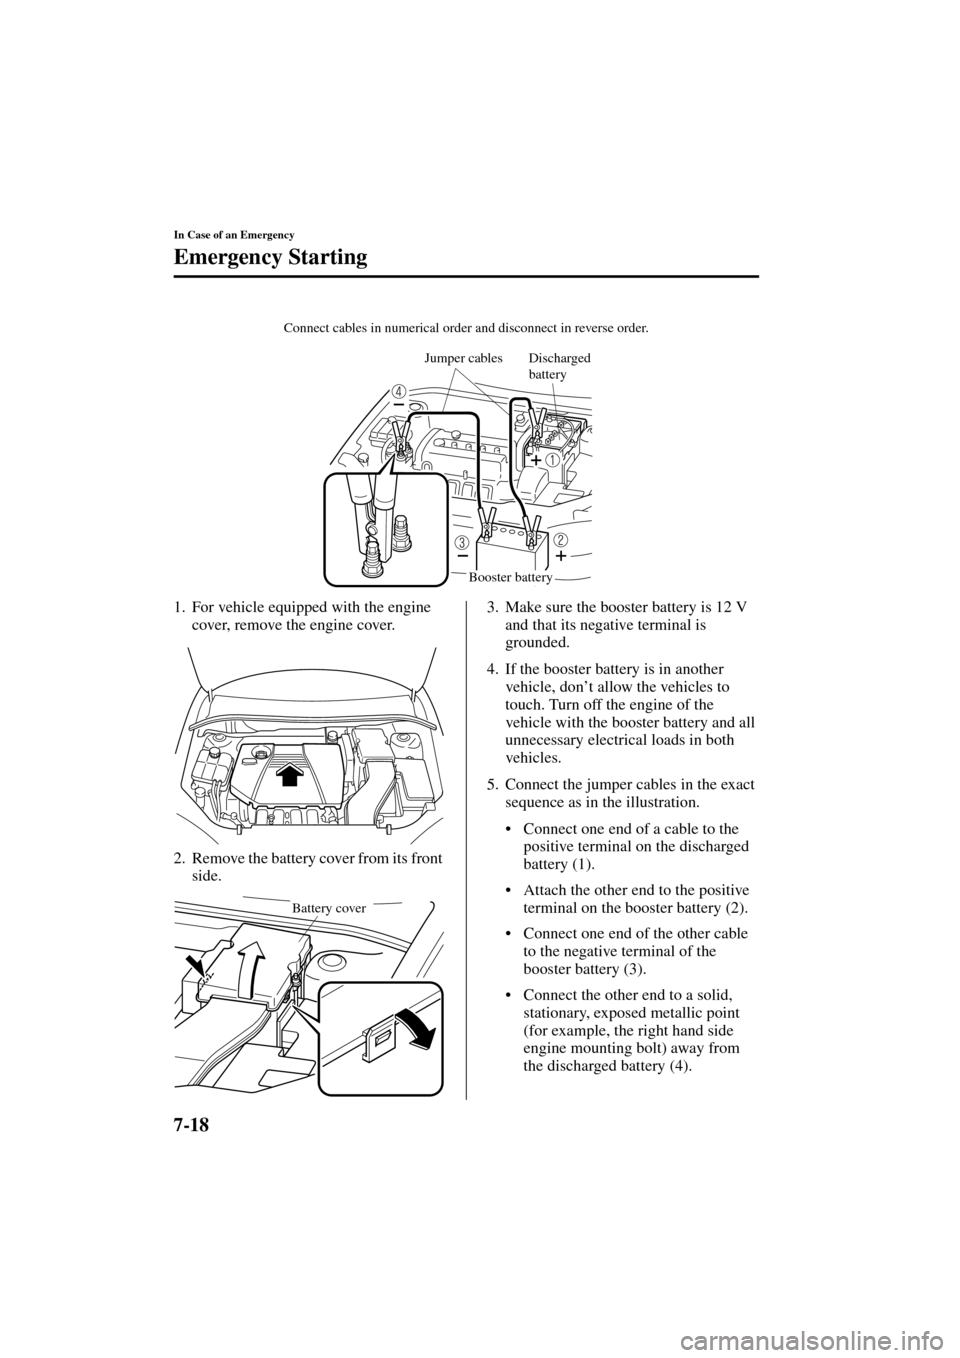 MAZDA MODEL 3 HATCHBACK 2004  Owners Manual (in English) 7-18
In Case of an Emergency
Emergency Starting
Form No. 8S18-EA-03I
1. For vehicle equipped with the engine 
cover, remove the engine cover.
2. Remove the battery cover from its front 
side.3. Make s